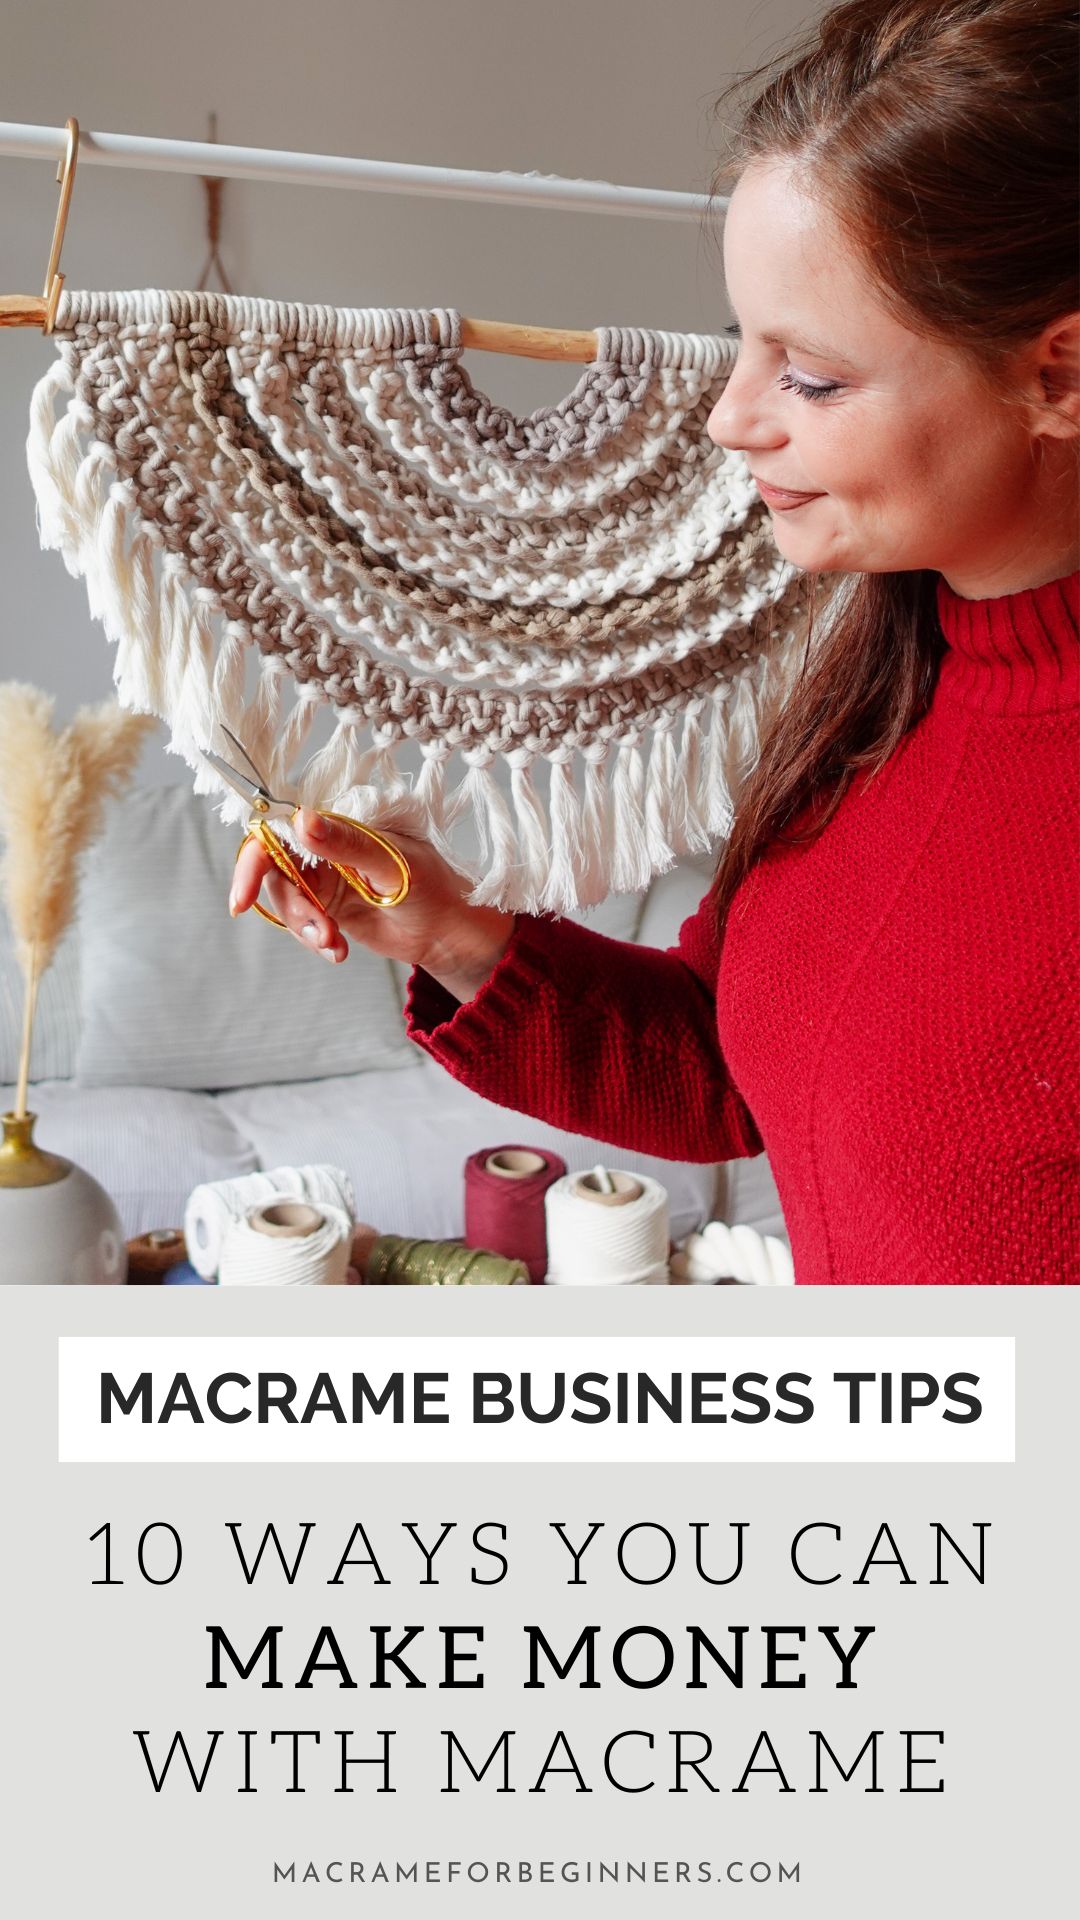 10 Ways You Can Make Money With Macrame – How to Start a Macrame Business 